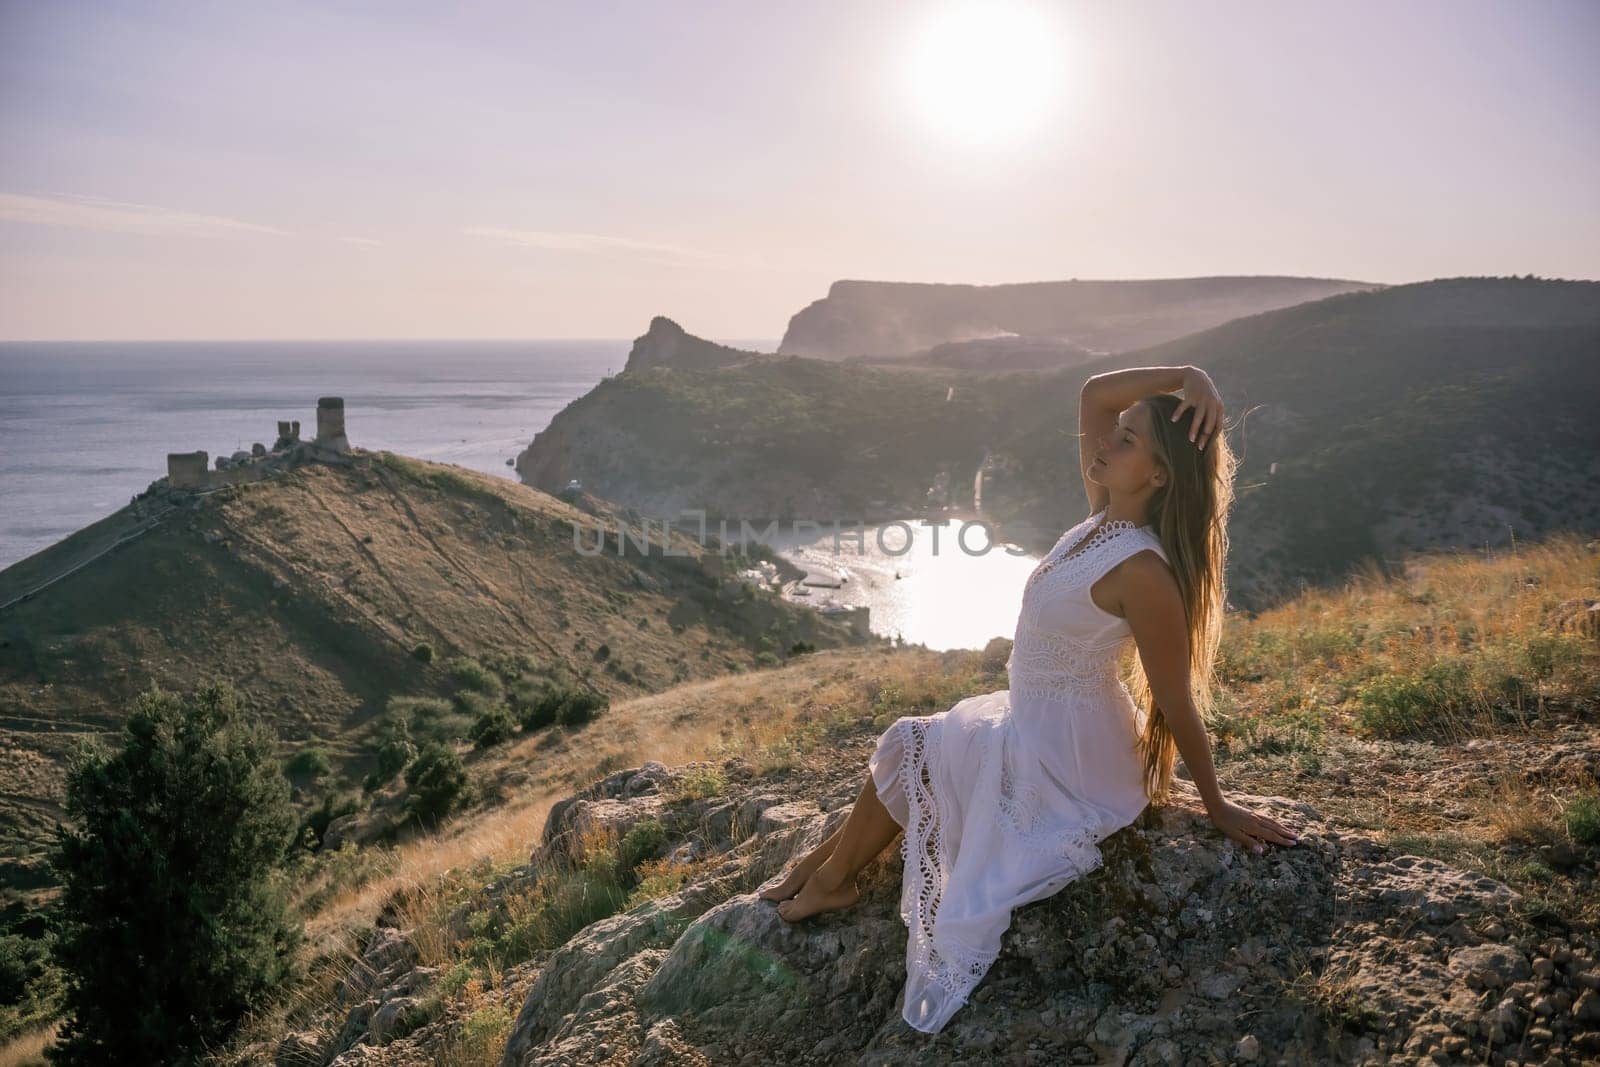 A woman in a white dress is sitting on a rock overlooking a body of water. She is enjoying the view and taking in the scenery